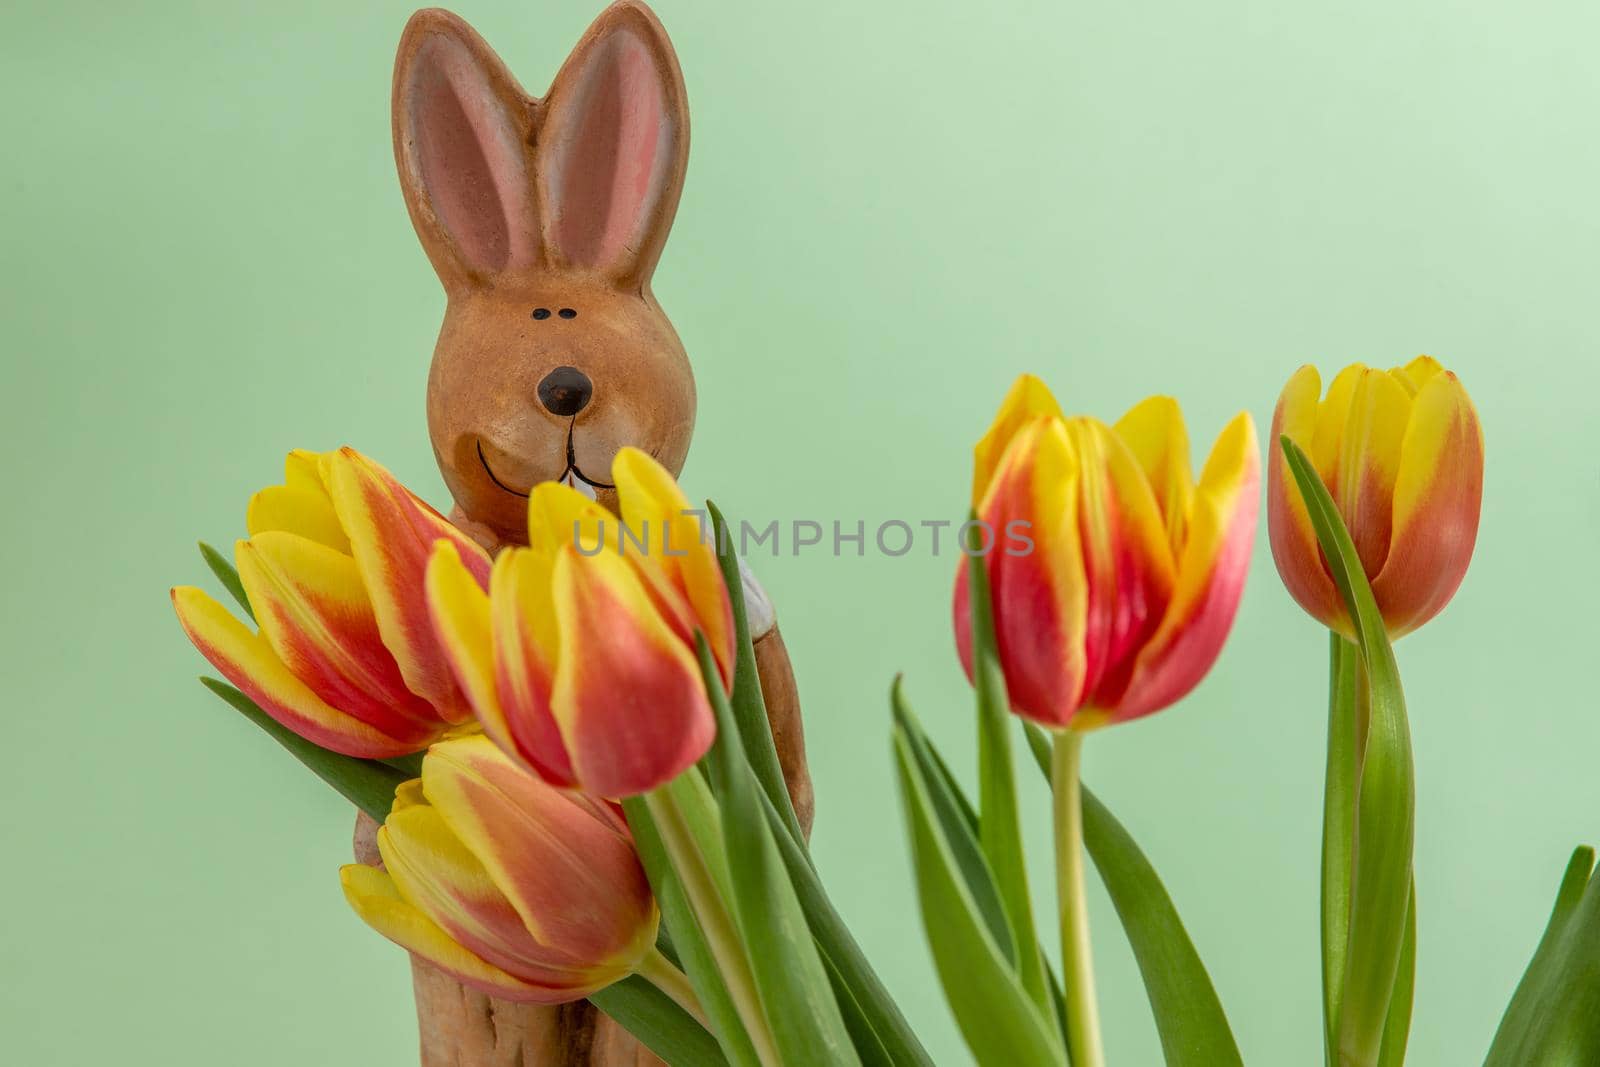 Easter bunny and bouquet with yellow red tulips against a light green background